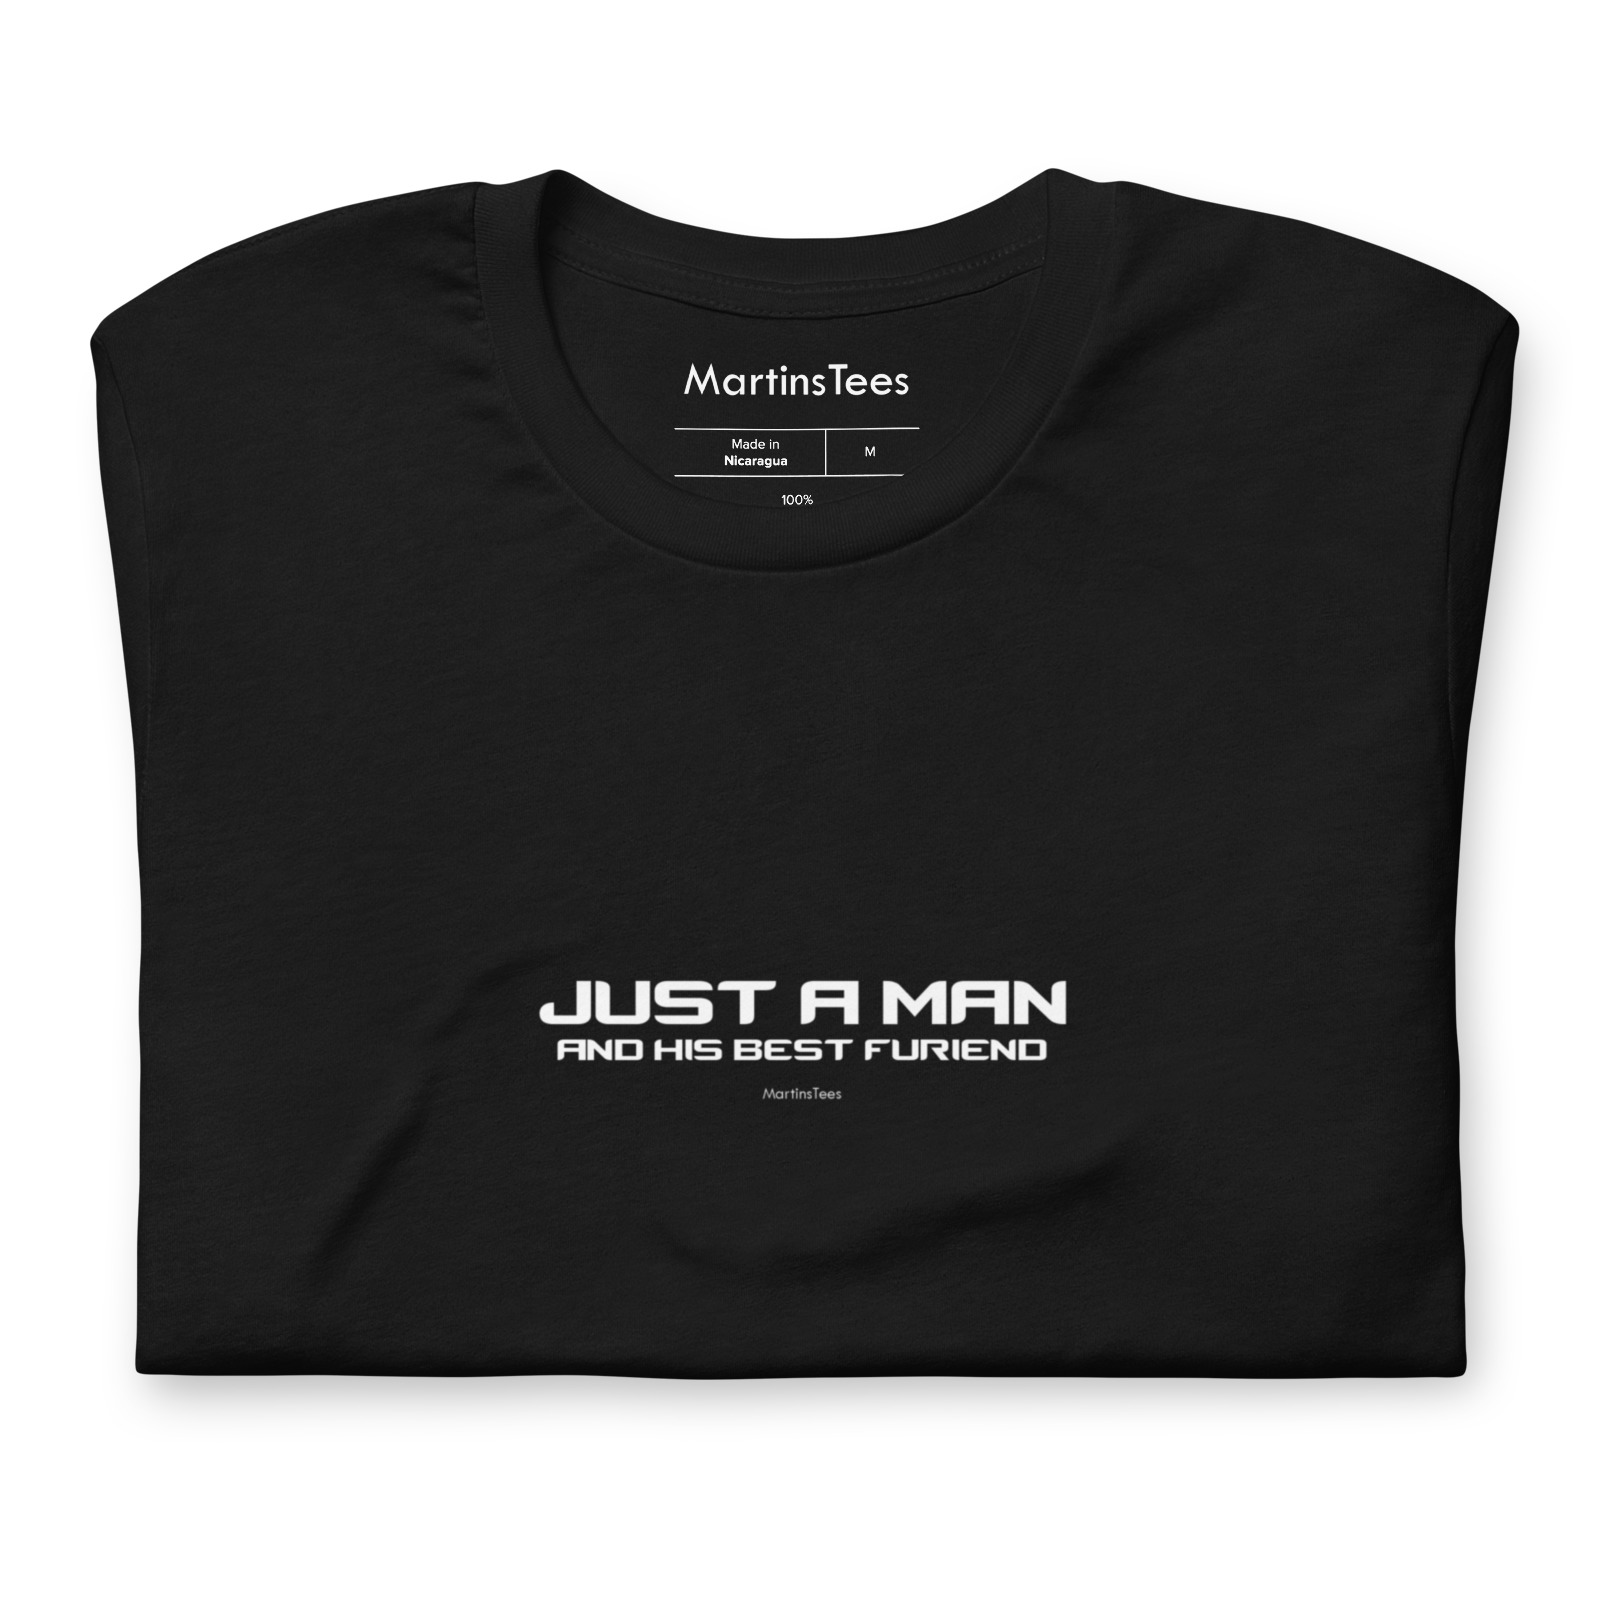 T-shirt: JUST A MAN - AND HIS BEST FURIEND